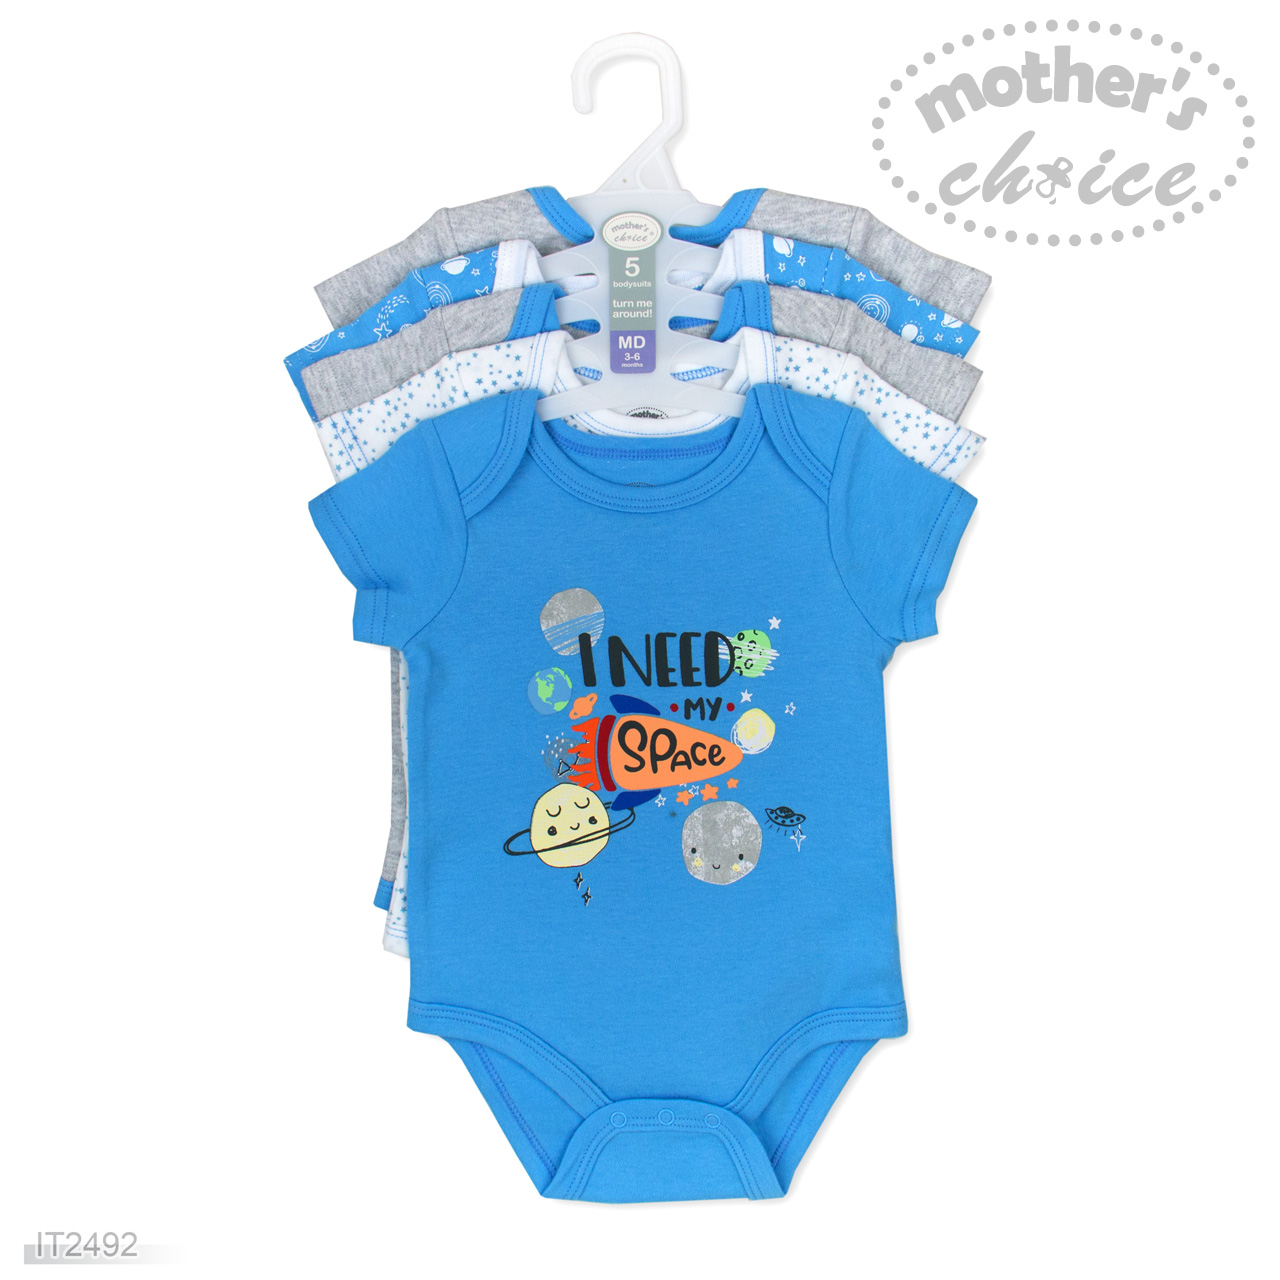 Mother's Choice 5-Piece Pack Baby 100% Pure Cotton Short Sleeves Blue Space Bodysuits